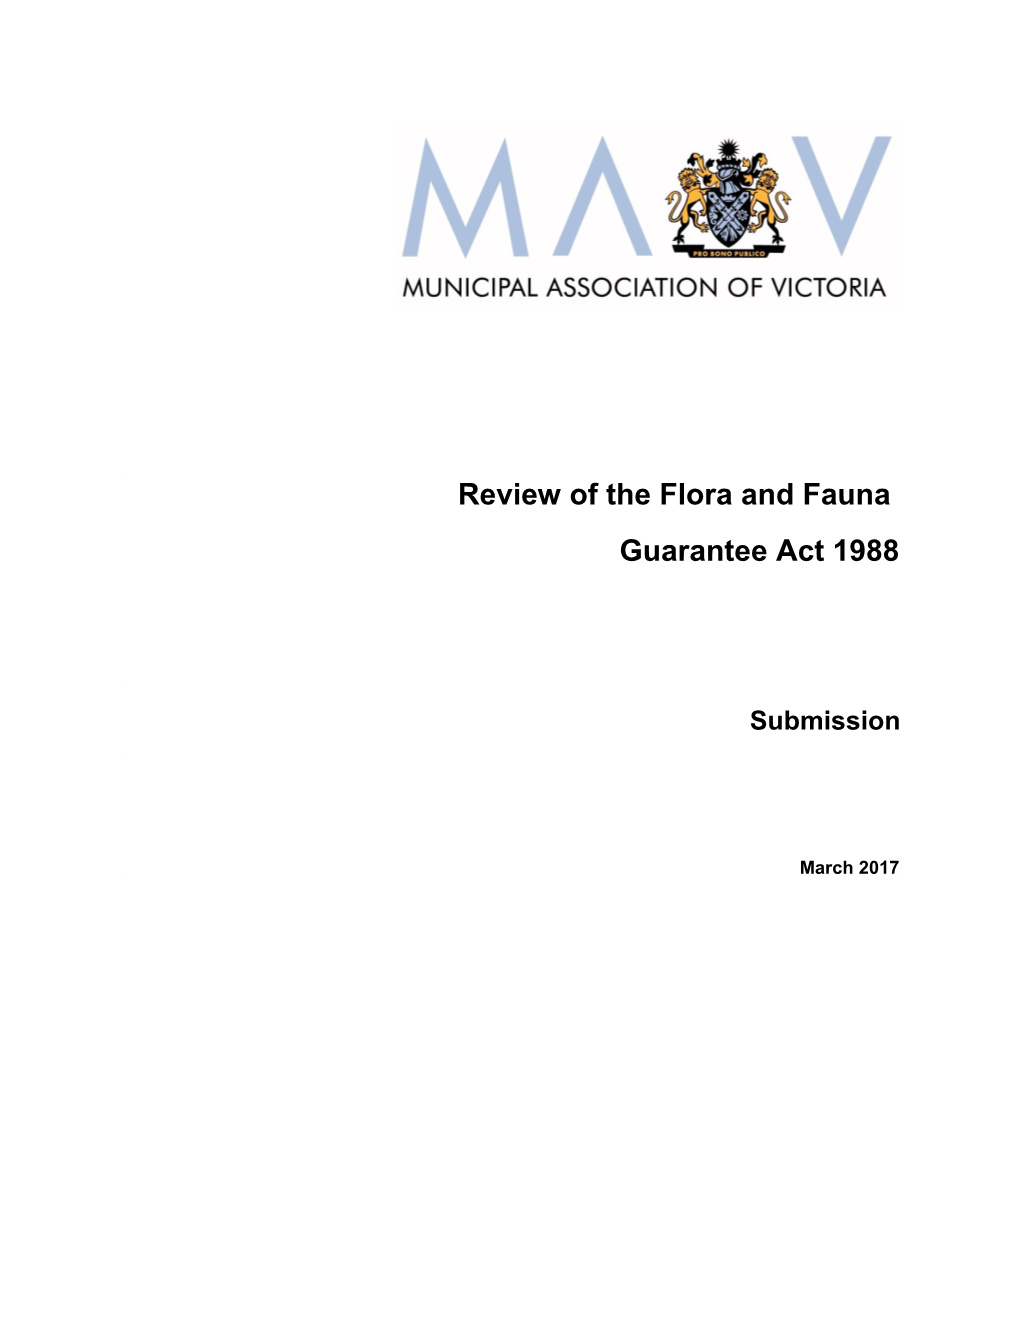 Submission to Review of the Flora and Fauna Guarantee Act 1988 - Mar 2017